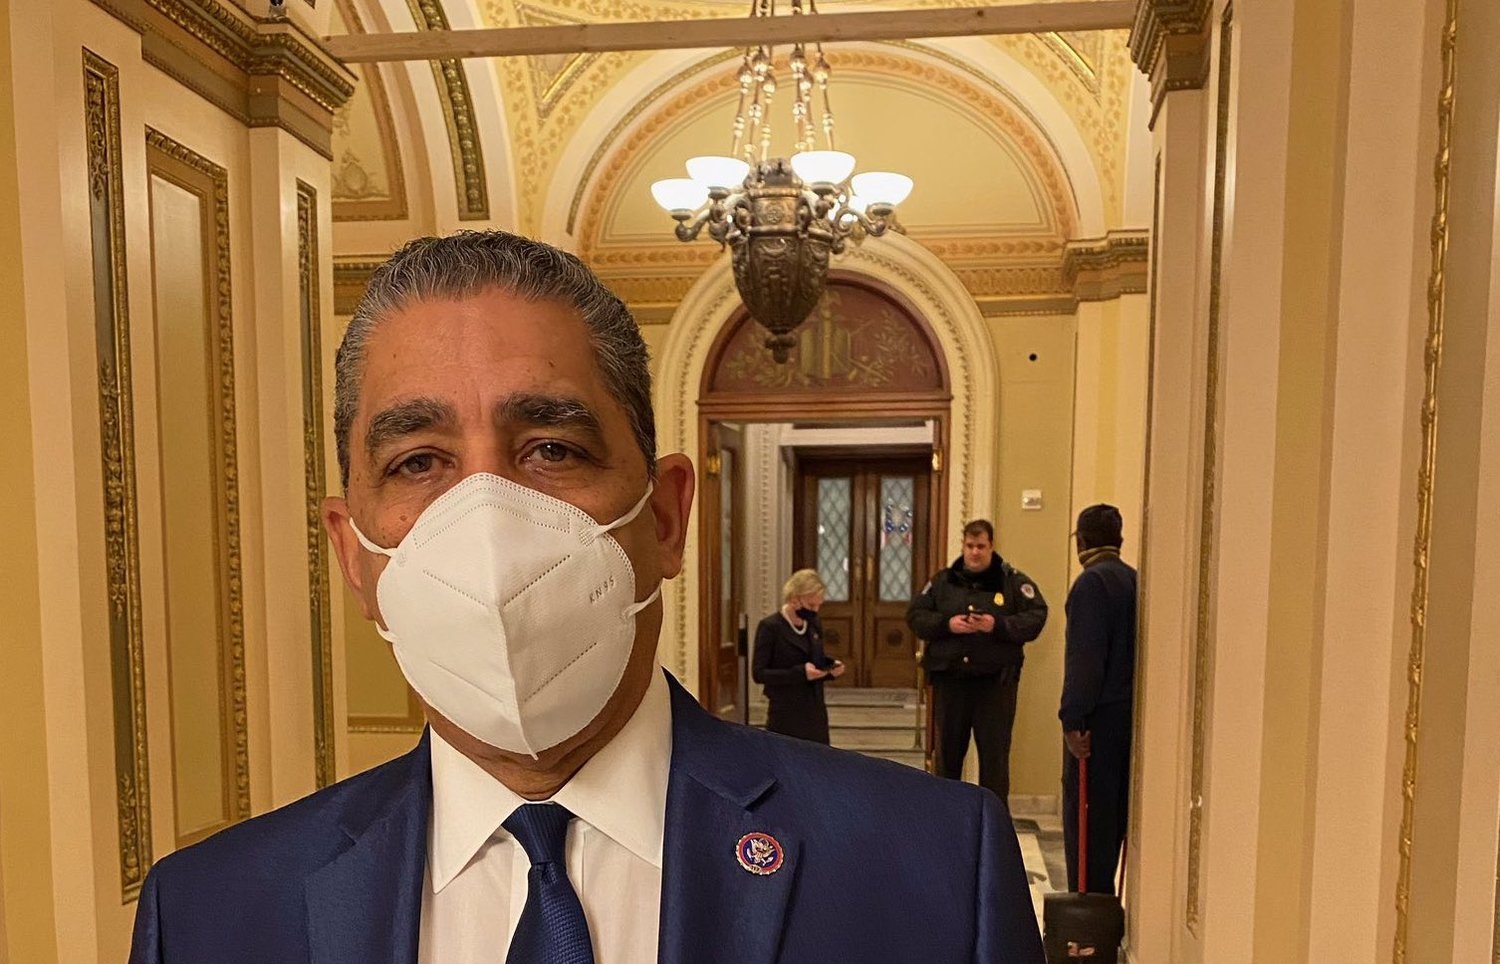 U.S. Rep. Adriano Espaillat is the latest member of congress to announce he's tested positive for the coronavirus. This is his second infection in the past 12 months, and has been both vaccinated and boosted. He says he is not experiencing any symptoms, and is currently isolating at home.